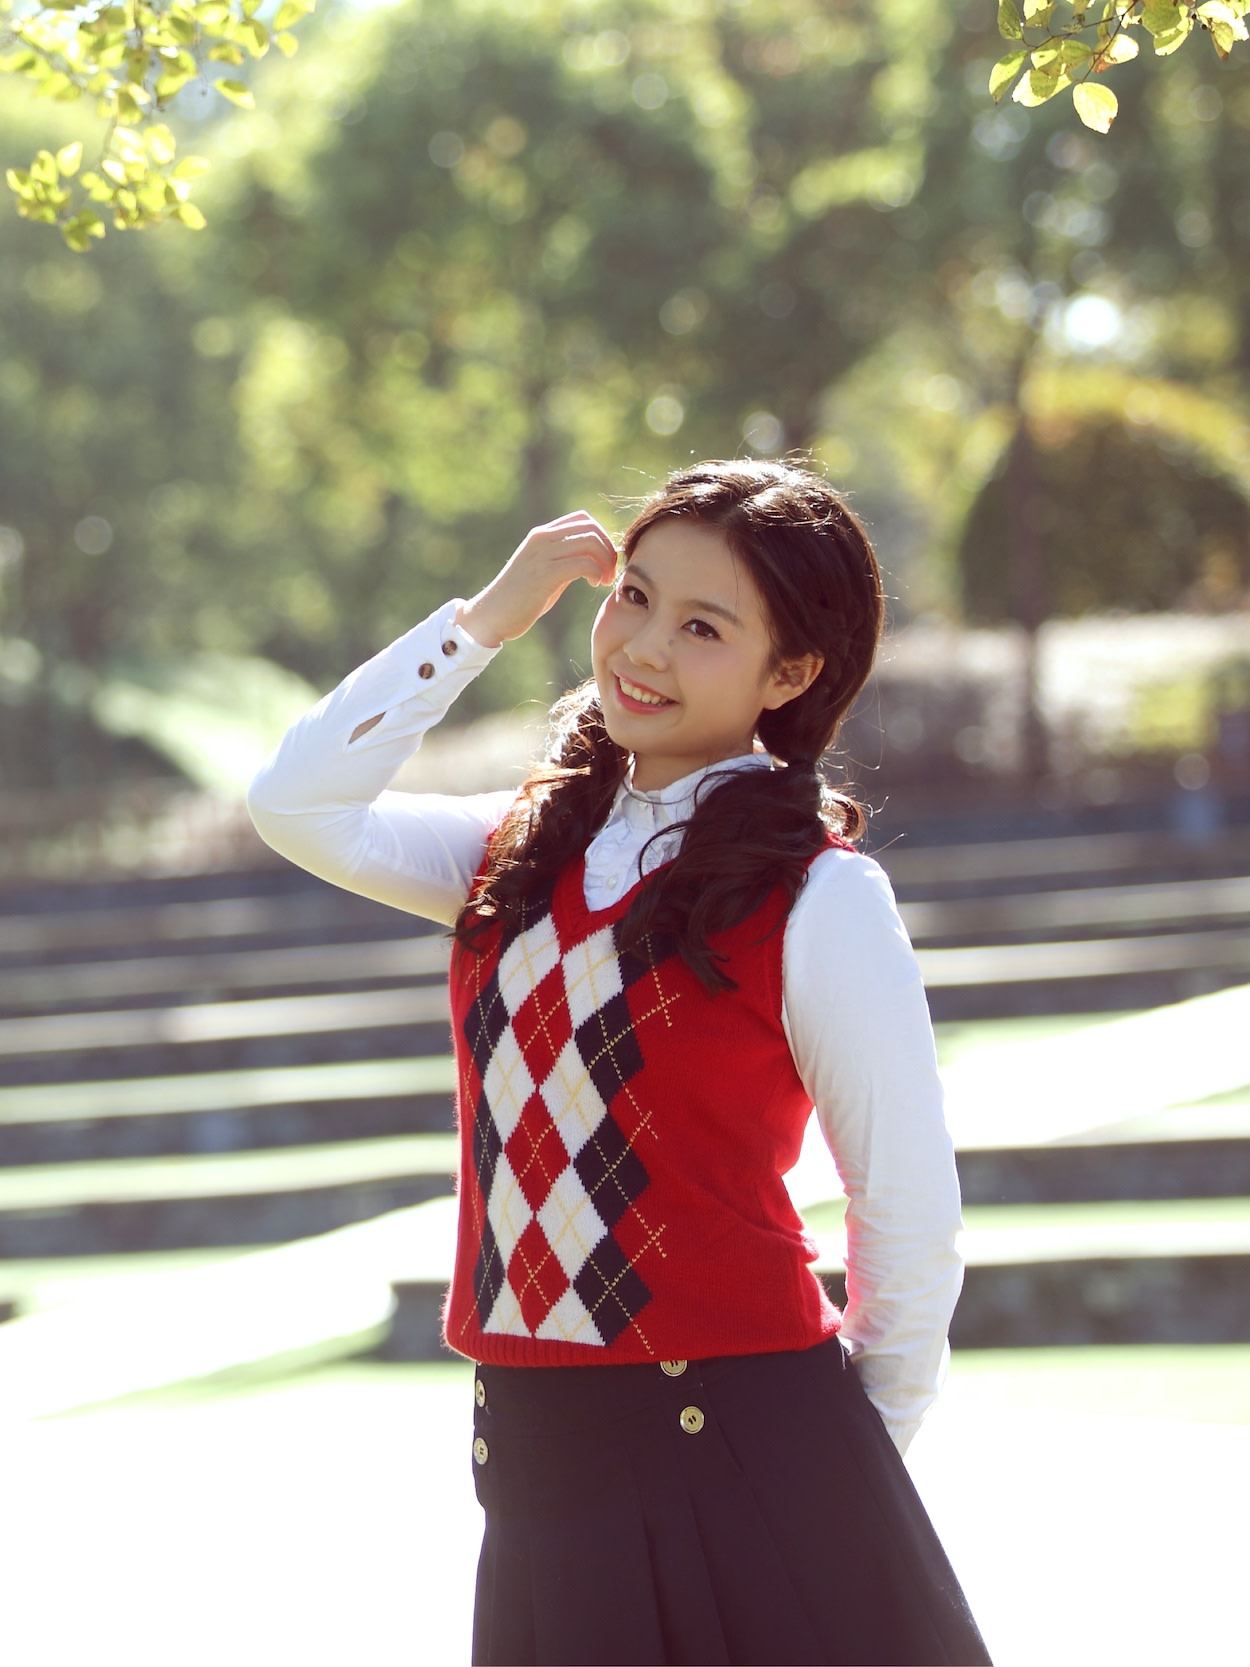 Ovilia Zhang pictured at a sunny park.